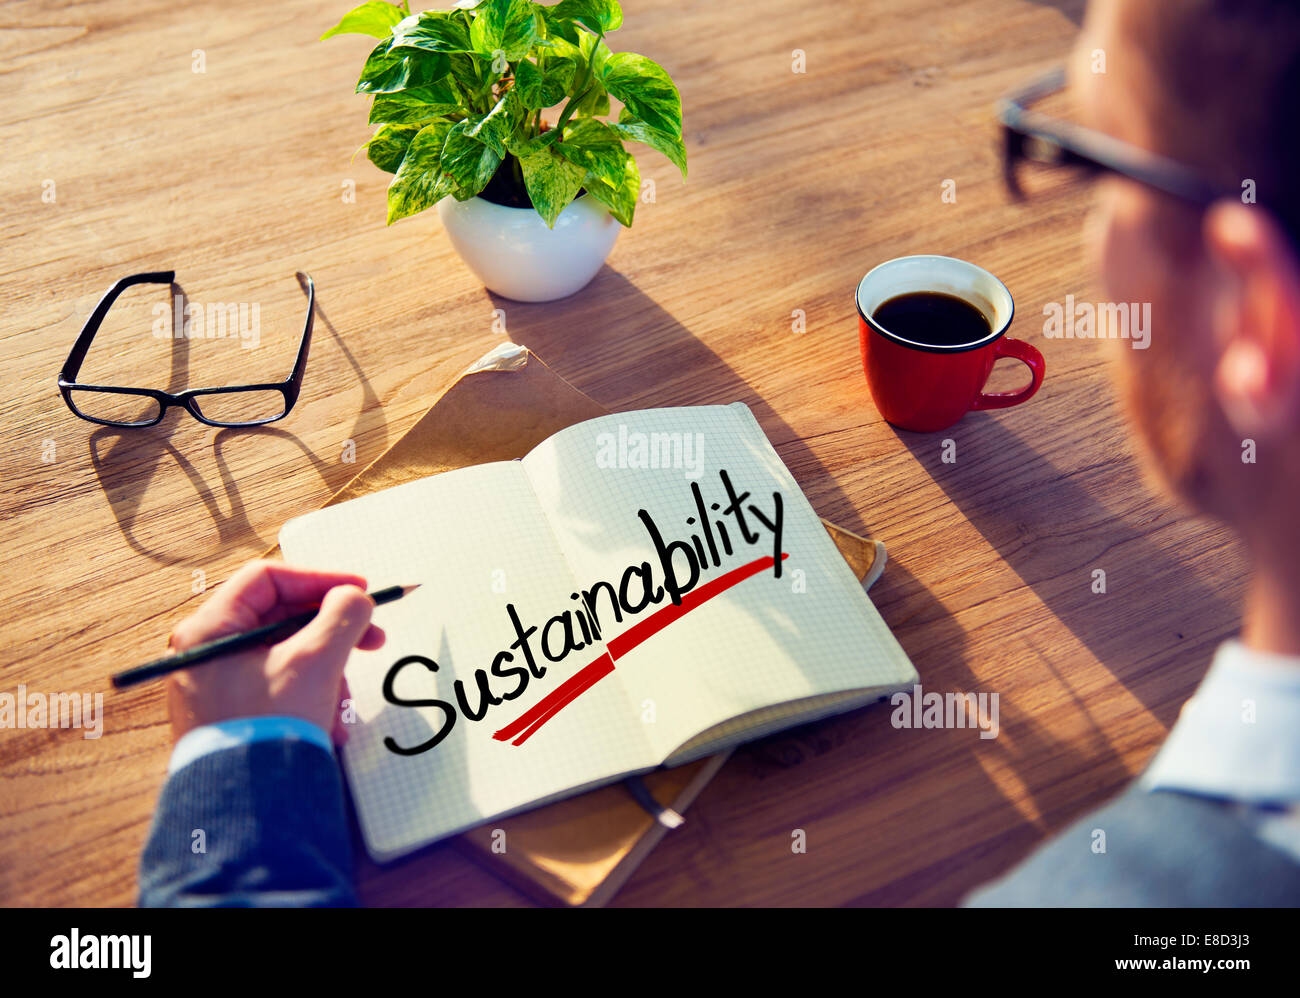 A Man Brainstorming about Sustainability Concept Stock Photo